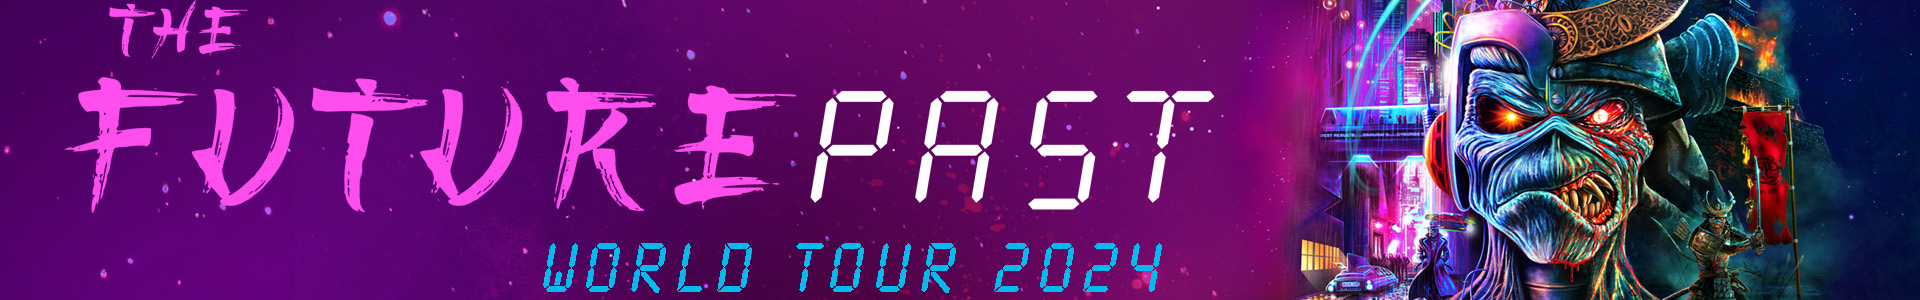 Brazilian show added to The Future Past Tour 2024